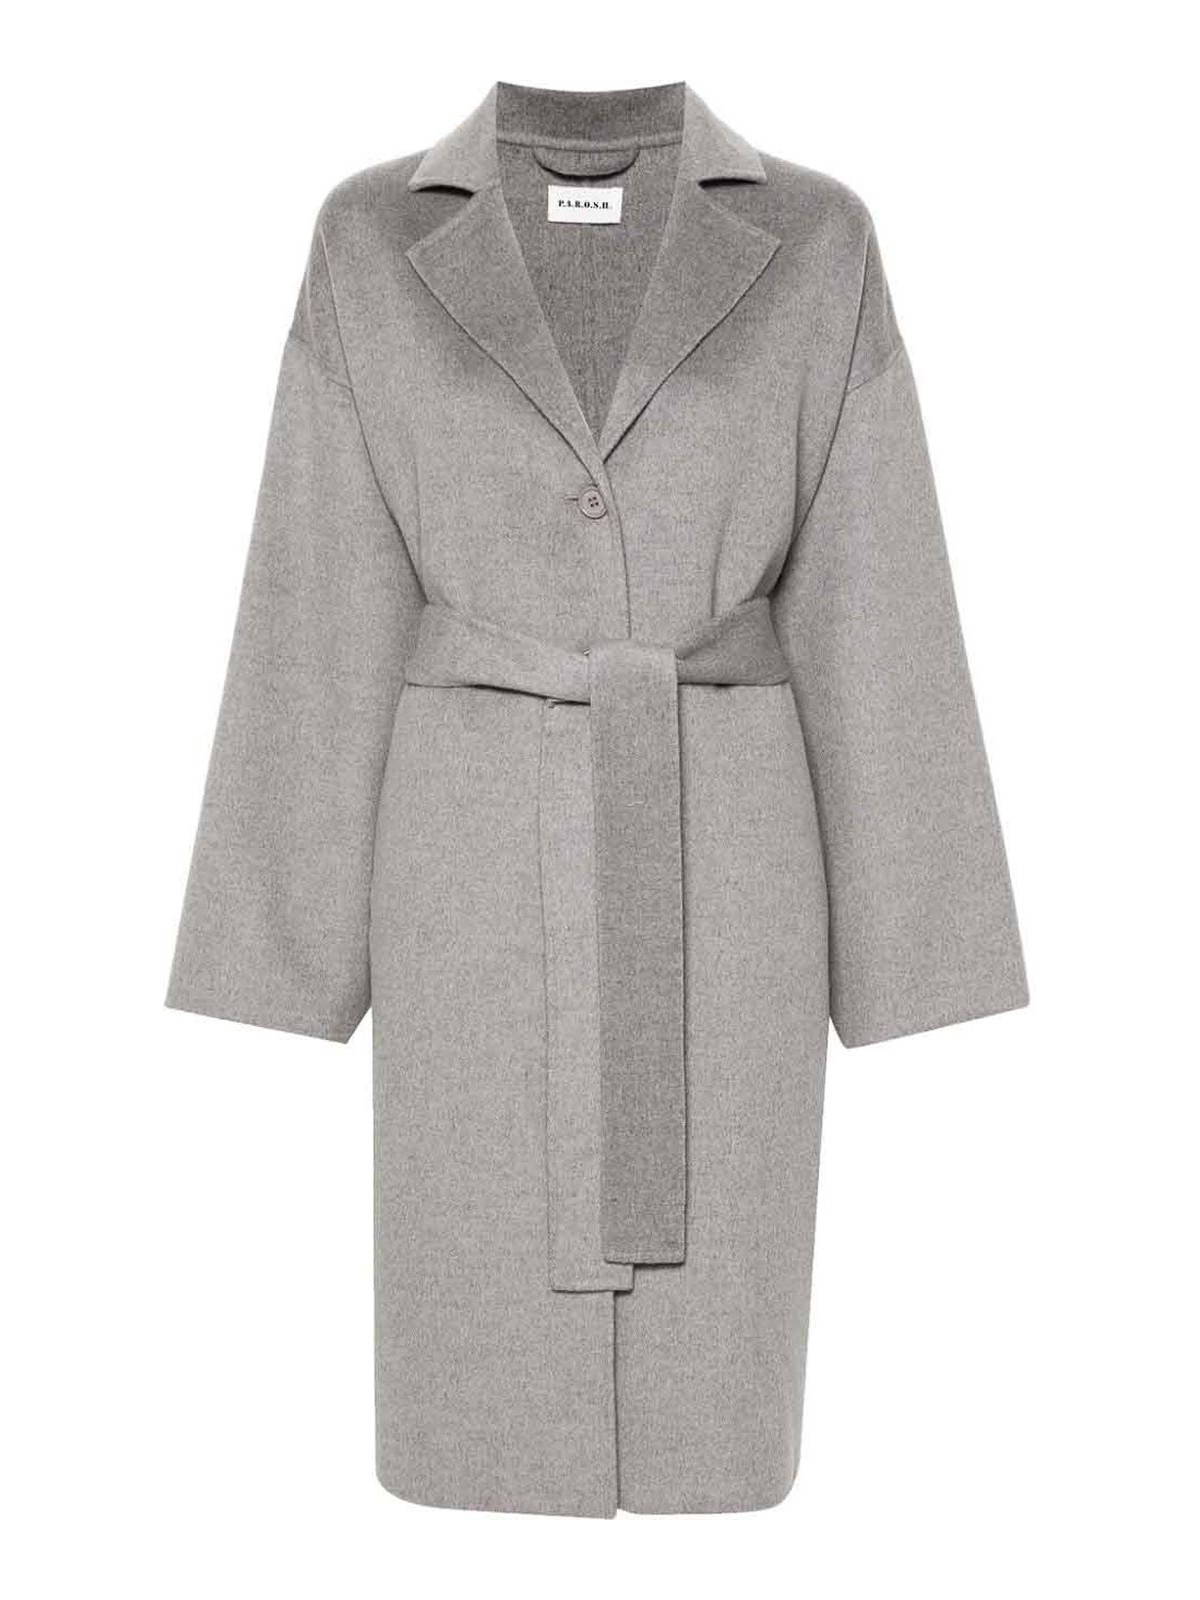 P.A.R.O.S.H FELTED WOOL-BLEND MAXI COAT